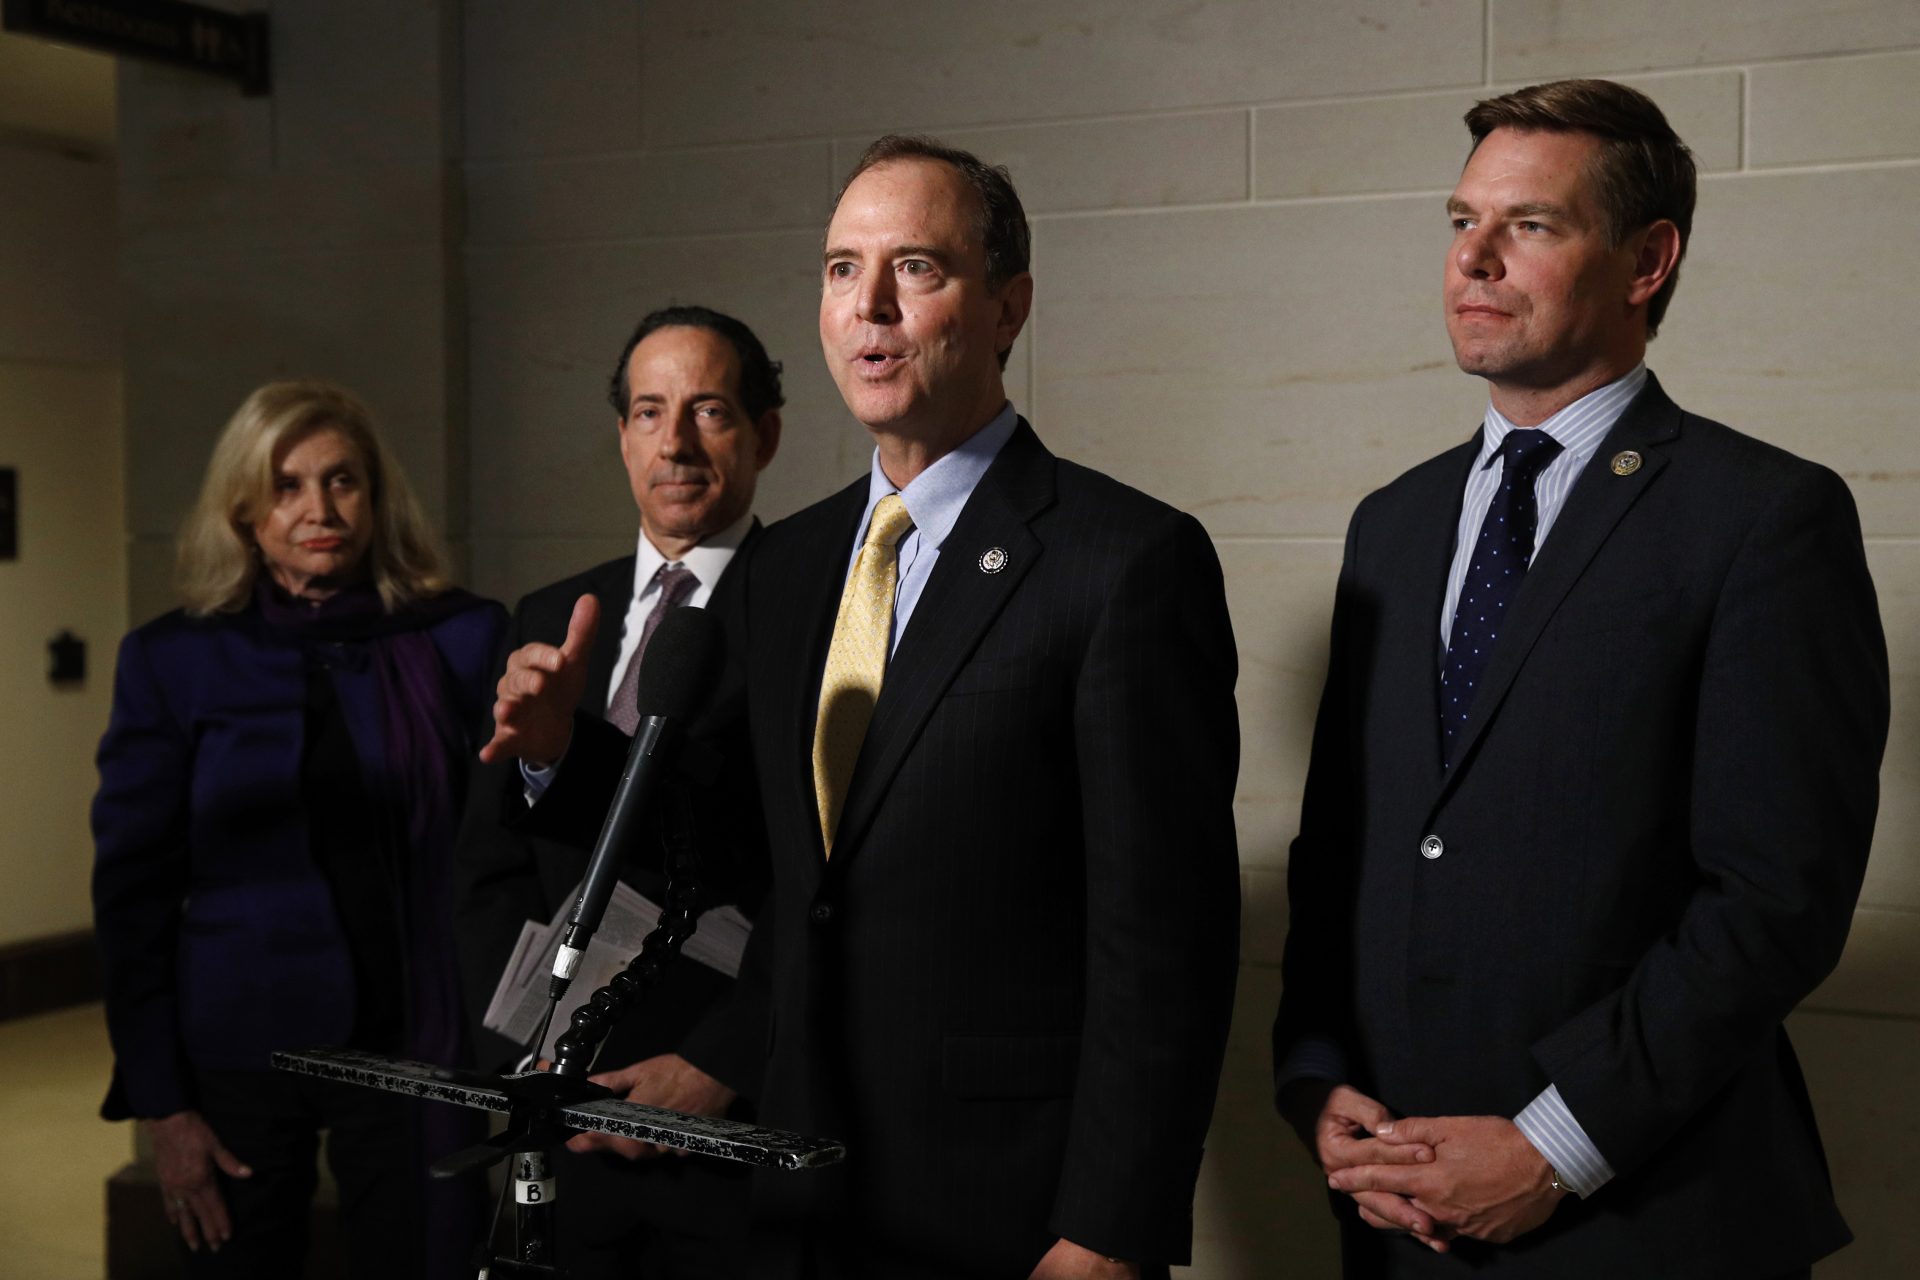 Rep. Adam Schiff, D-Calif., center, speaks with members of the media after former deputy national security adviser Charles Kupperman signaled that he would not appear as scheduled for a closed door meeting to testify as part of the House impeachment inquiry into President Donald Trump, Monday, Oct. 28, 2019, on Capitol Hill in Washington. Standing with Schiff are Carolyn Maloney, D-N.Y., from left, Rep. Jamie Raskin, D-Md., and Rep. Eric Swalwell, D-Calif.